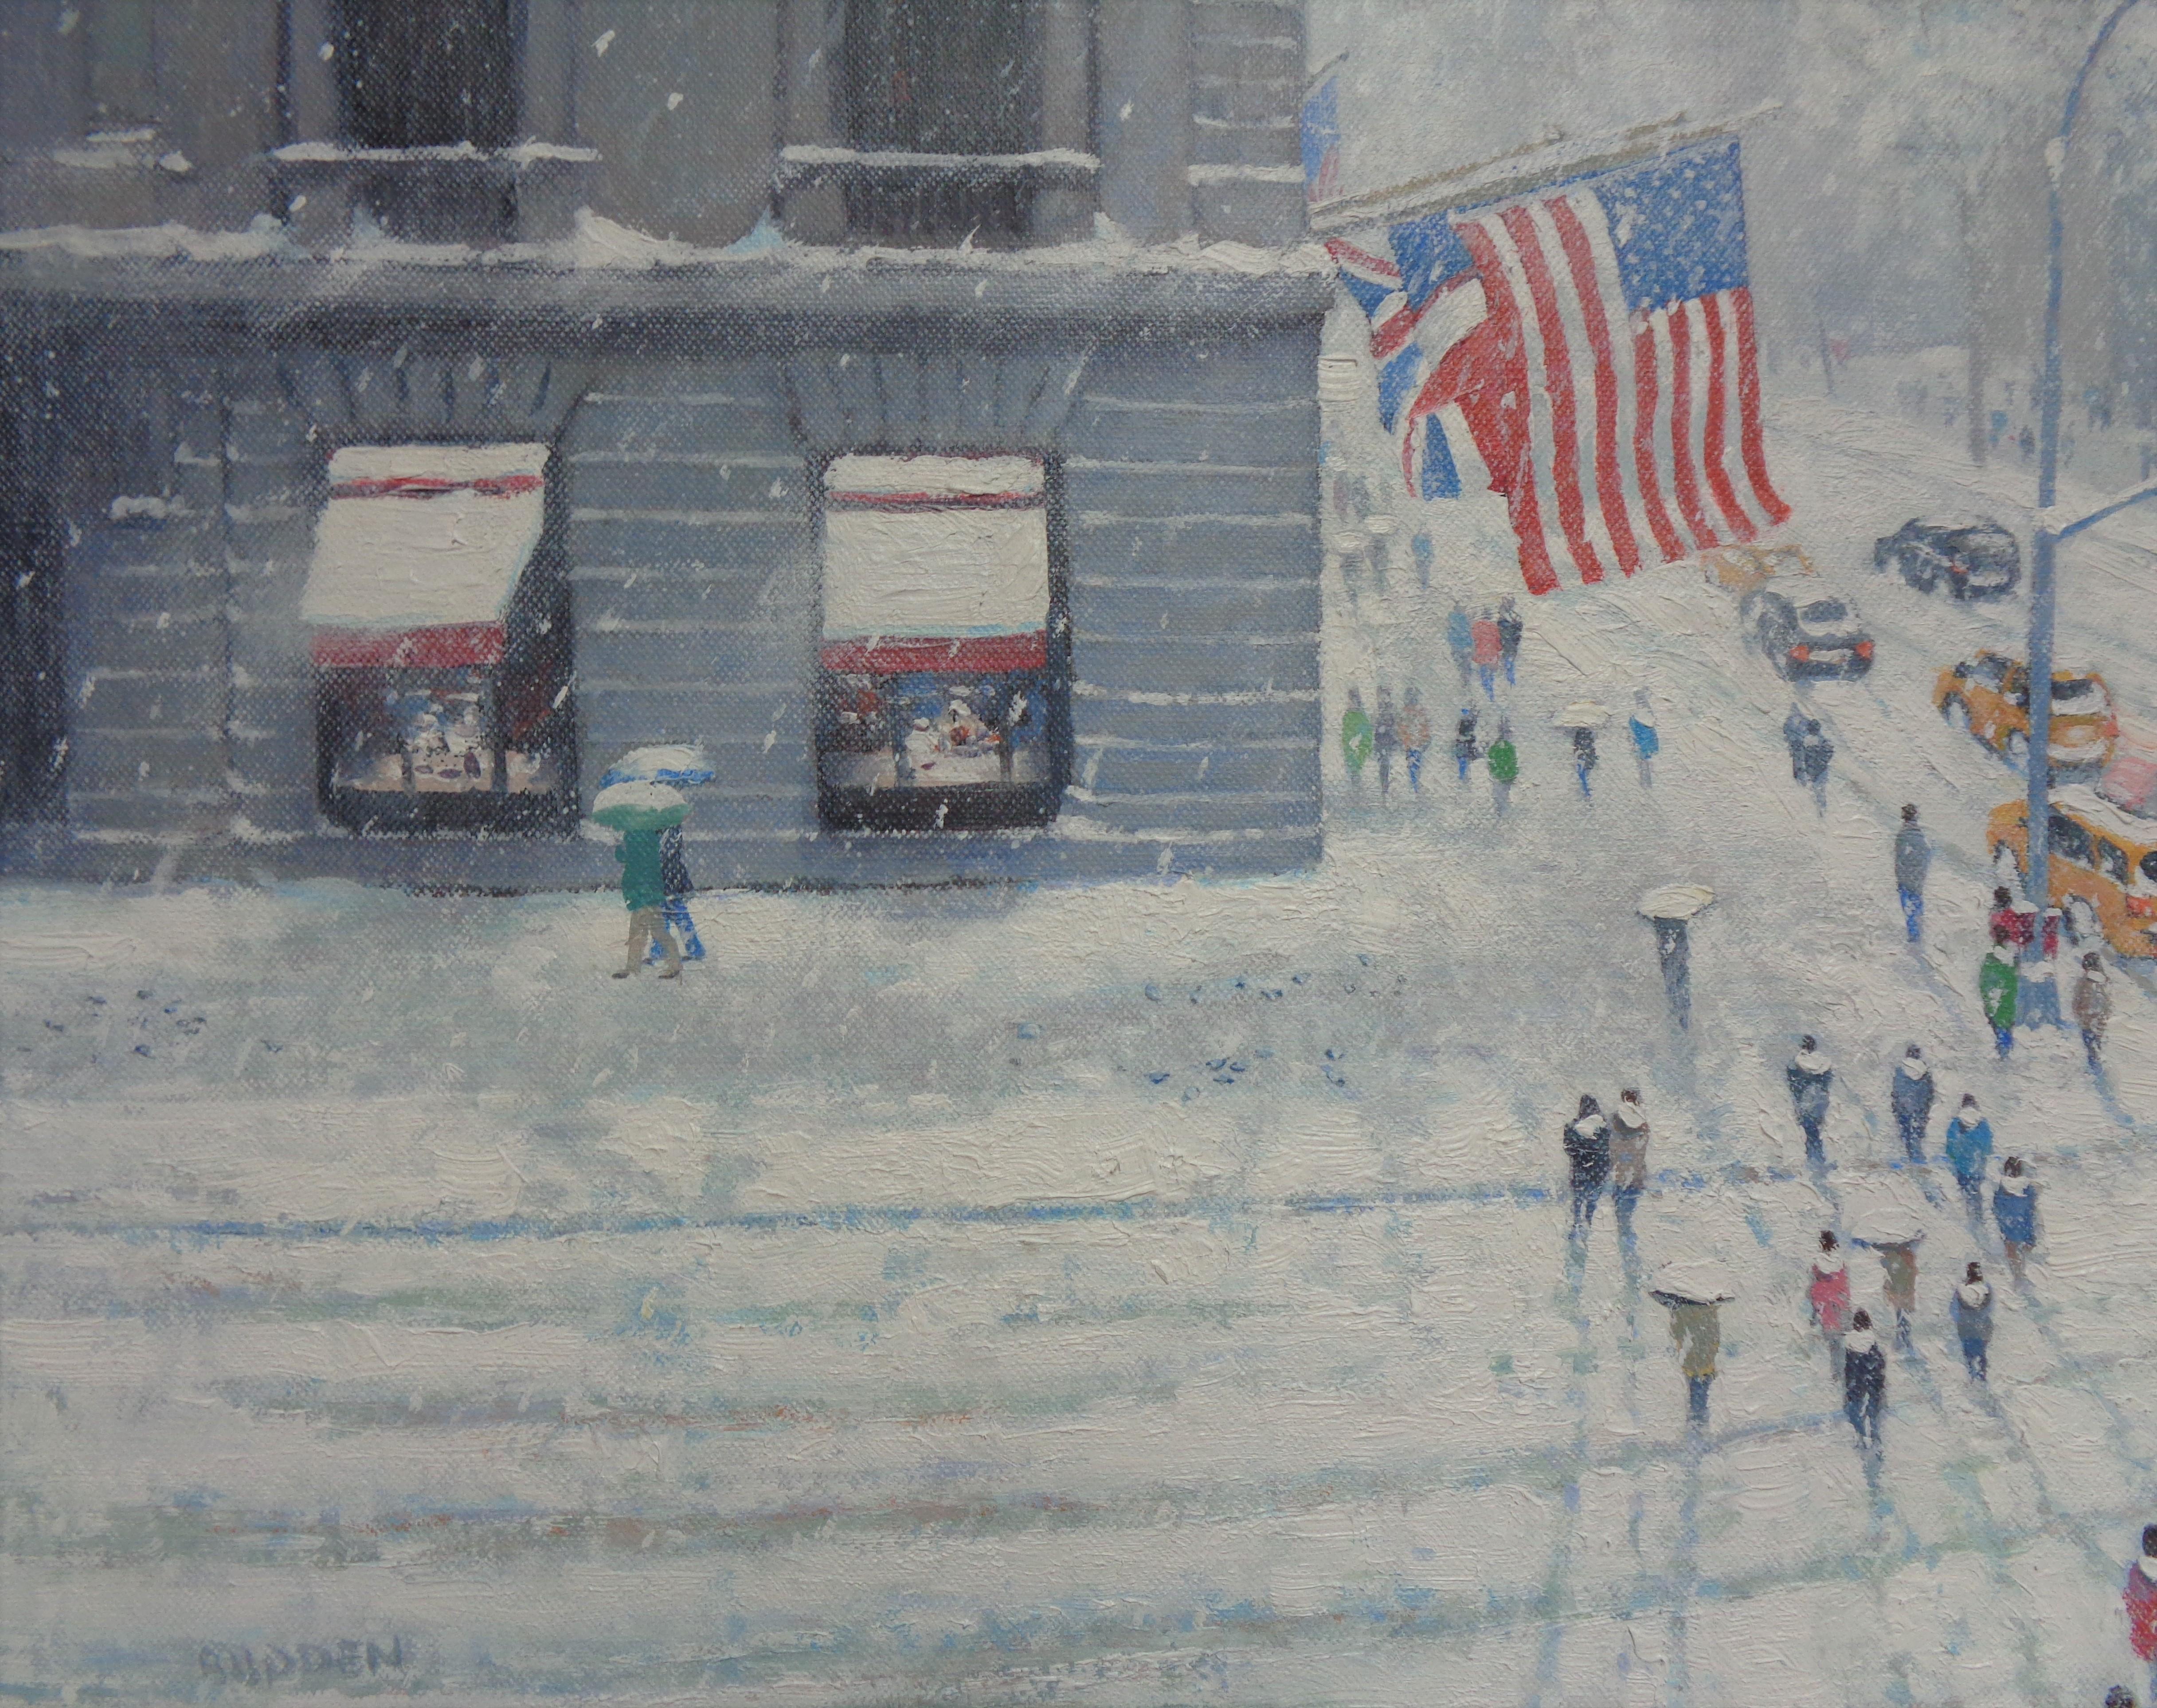  New York City Snow Oil Painting Michael Budden Above Cartier's Corner For Sale 3